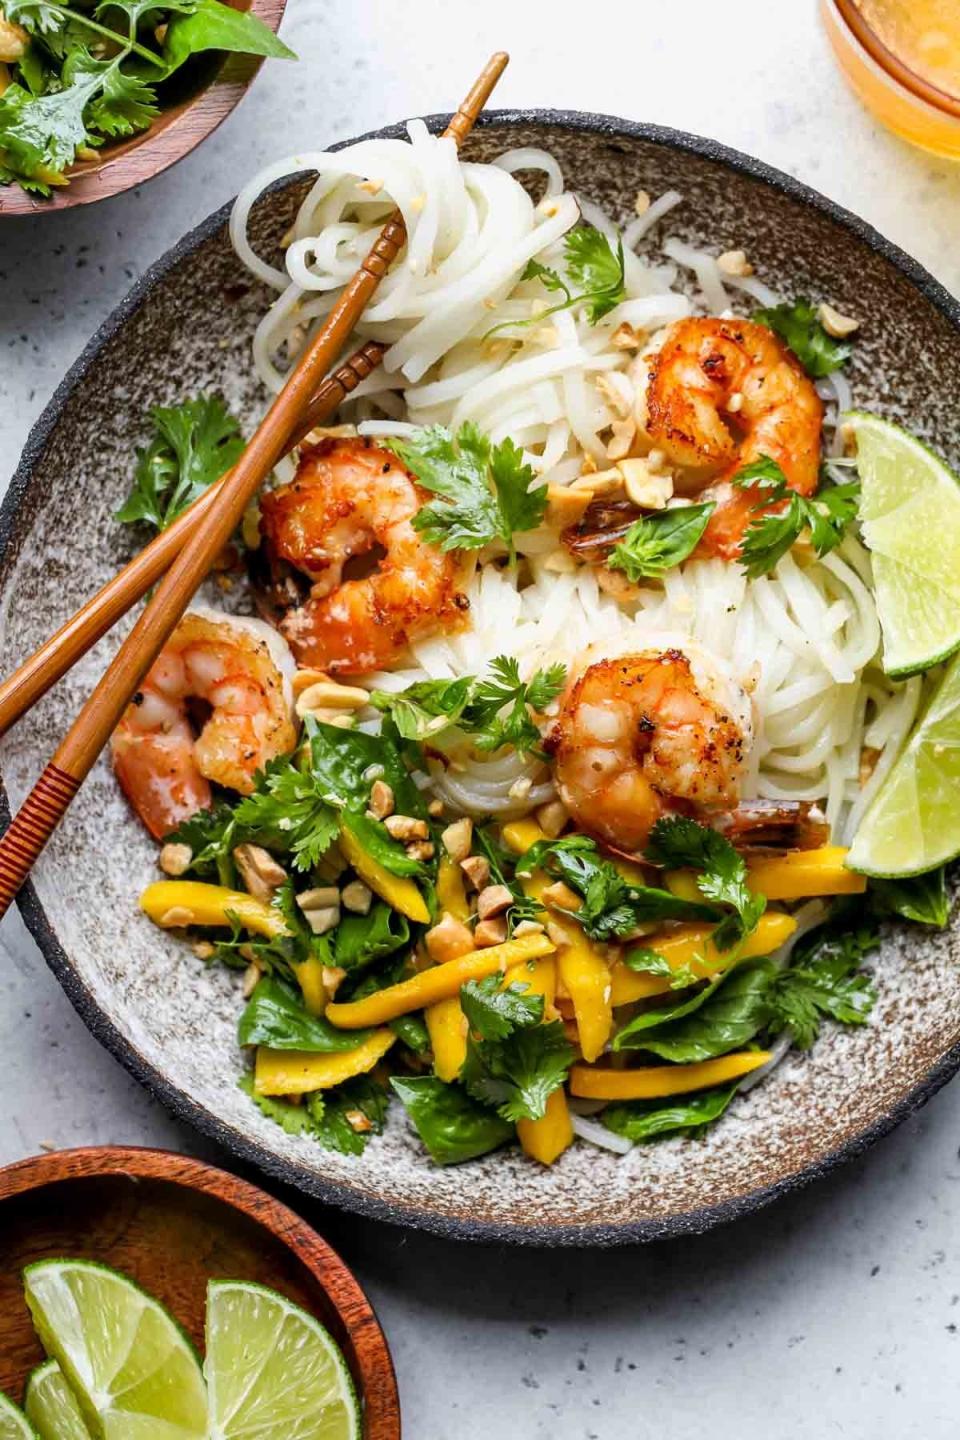 A noodle salad with mangos and shrimp.